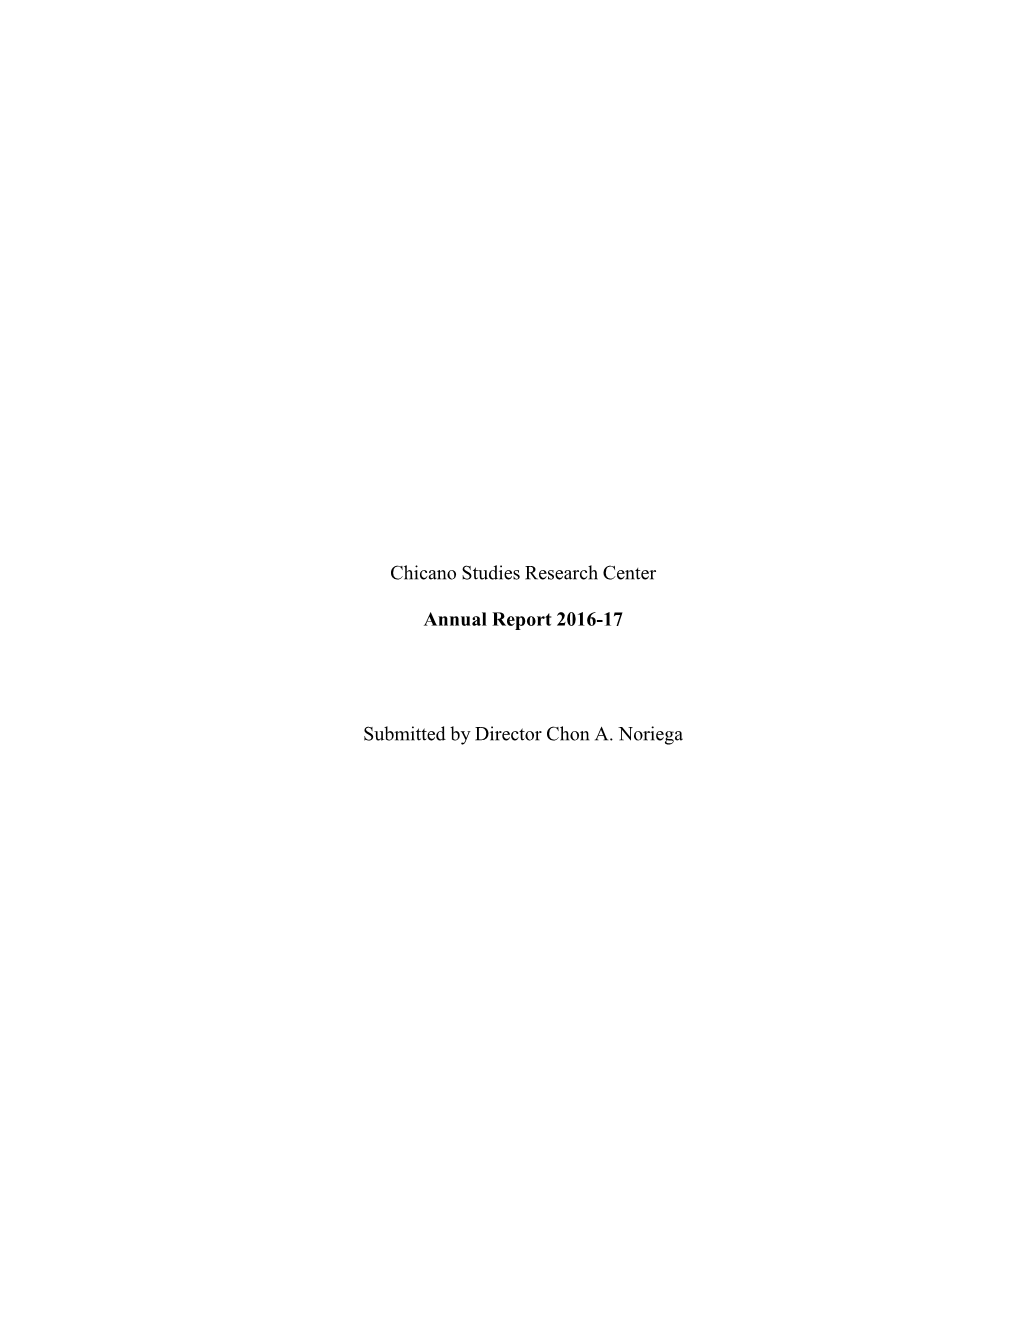 Chicano Studies Research Center Annual Report 2016-17 Submitted